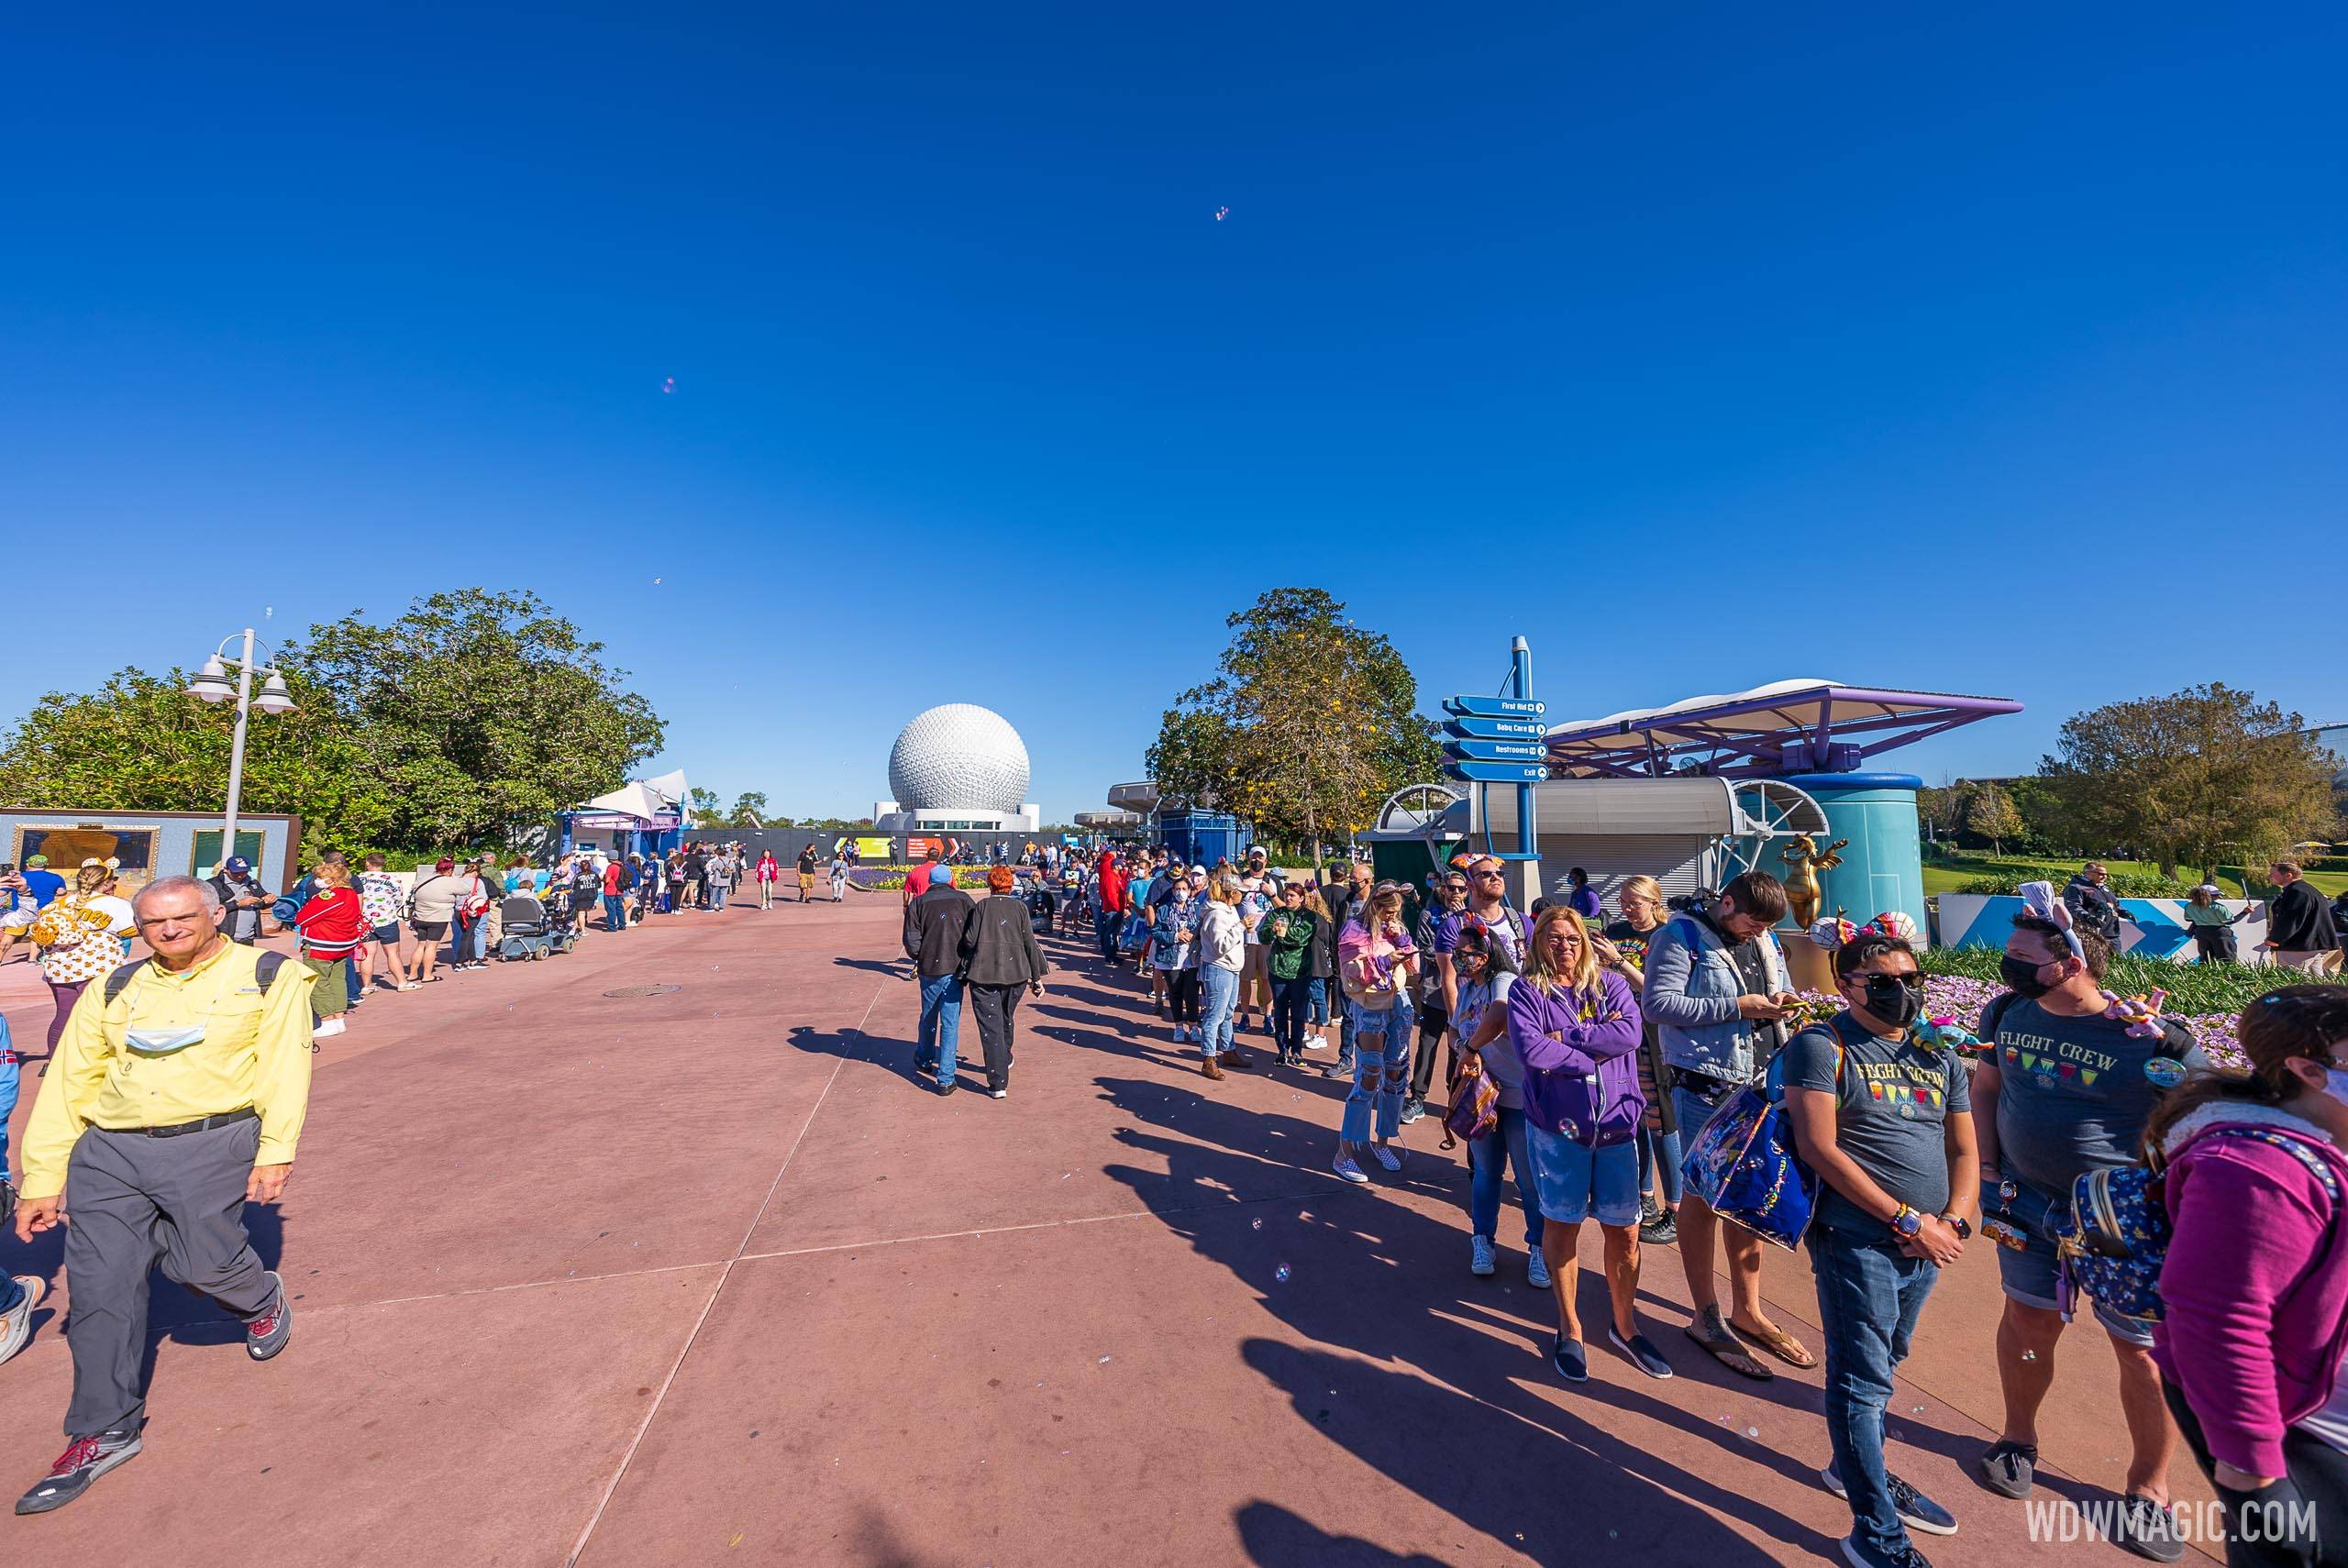 Guests queued for hours to purchase the 2022 Figment popcorn bucket